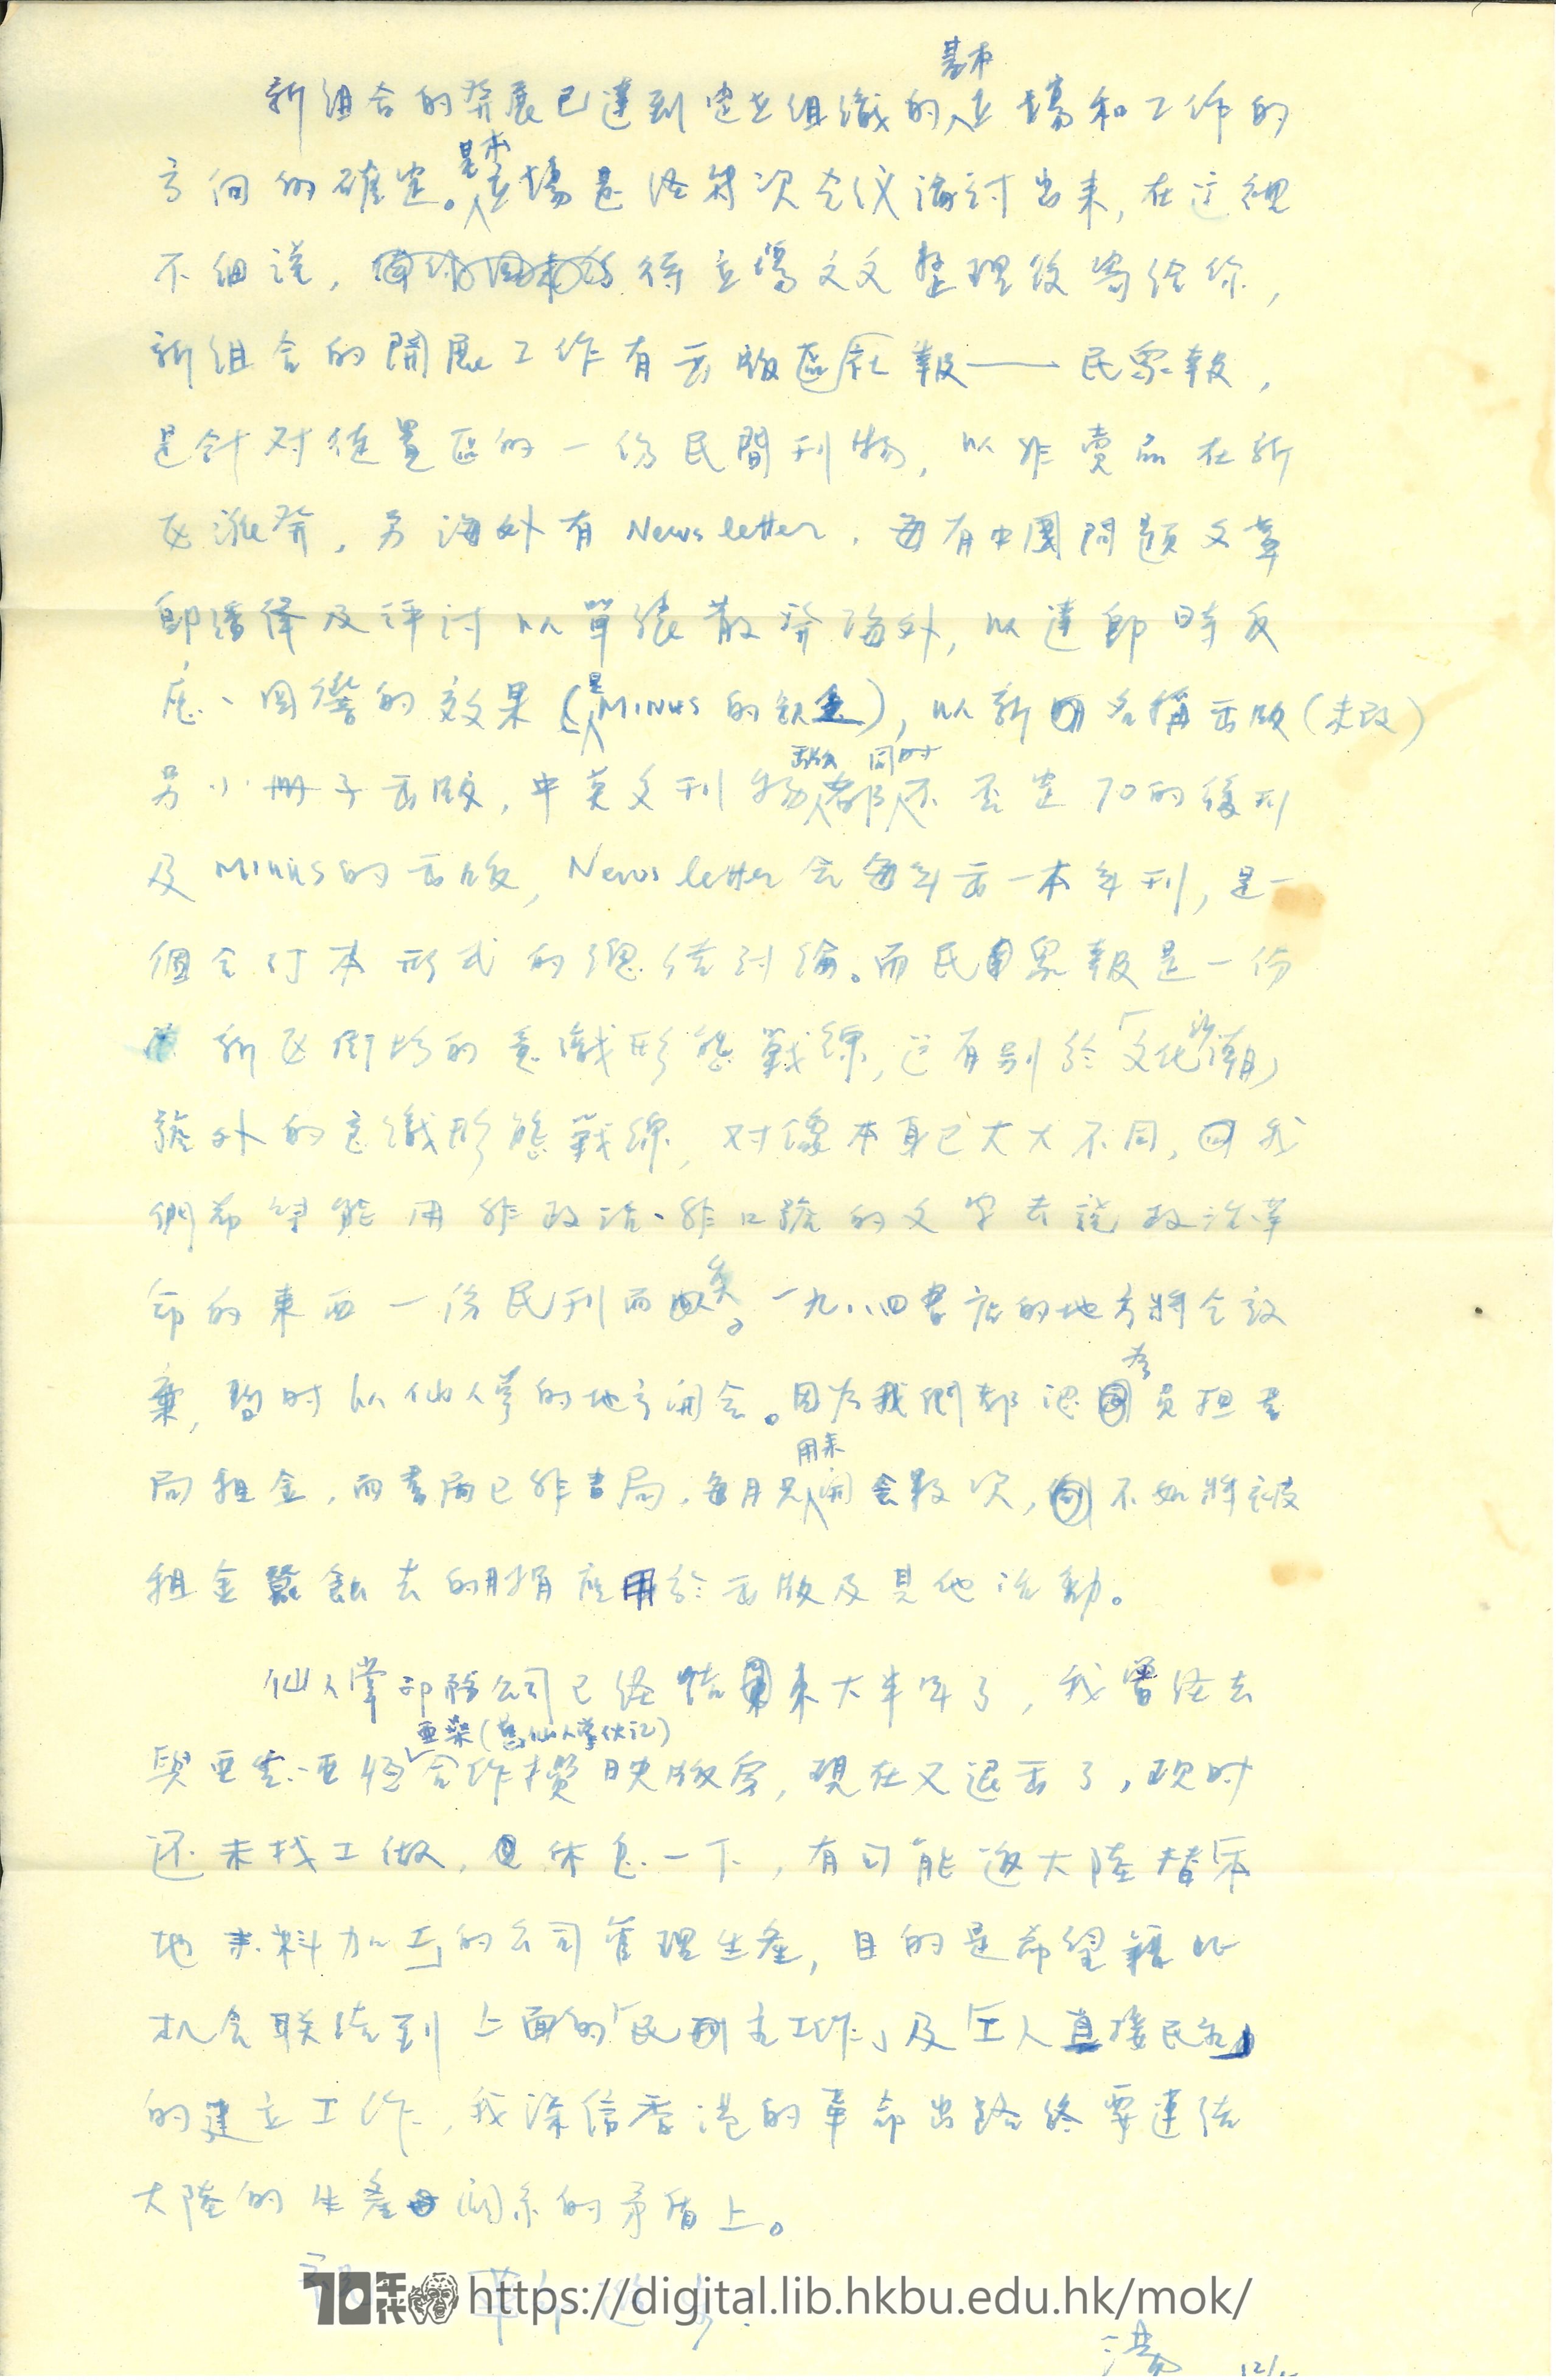   Letter from Tong Shi Hong 湯 